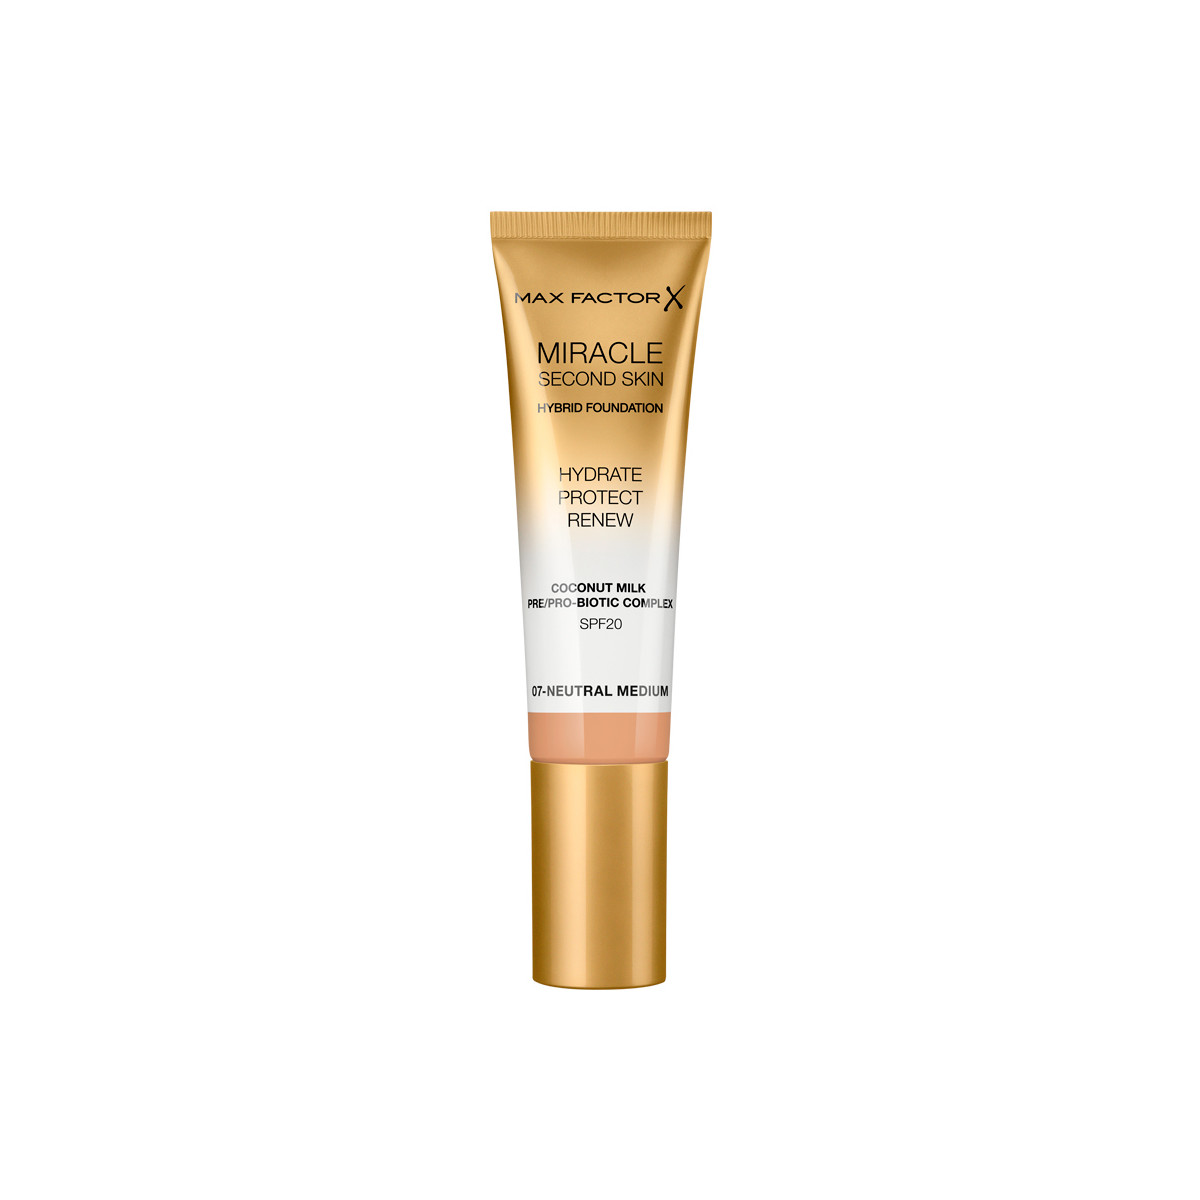 Beauty Damen Make-up & Foundation  Max Factor Miracle Touch Second Skin Found.spf20 7-neutral Medium 